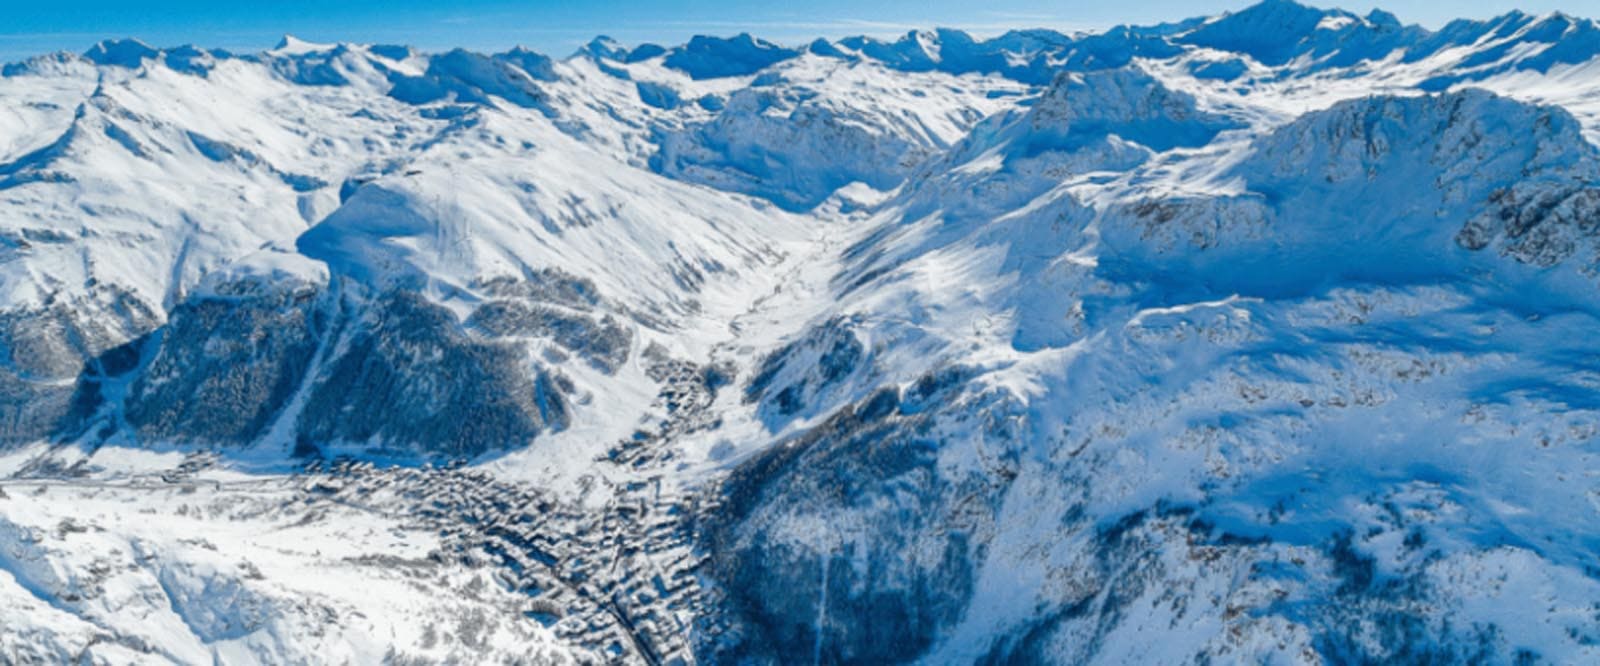 The French ski resort of Val d'Isere tucked into the Isere Valley in the French Alps